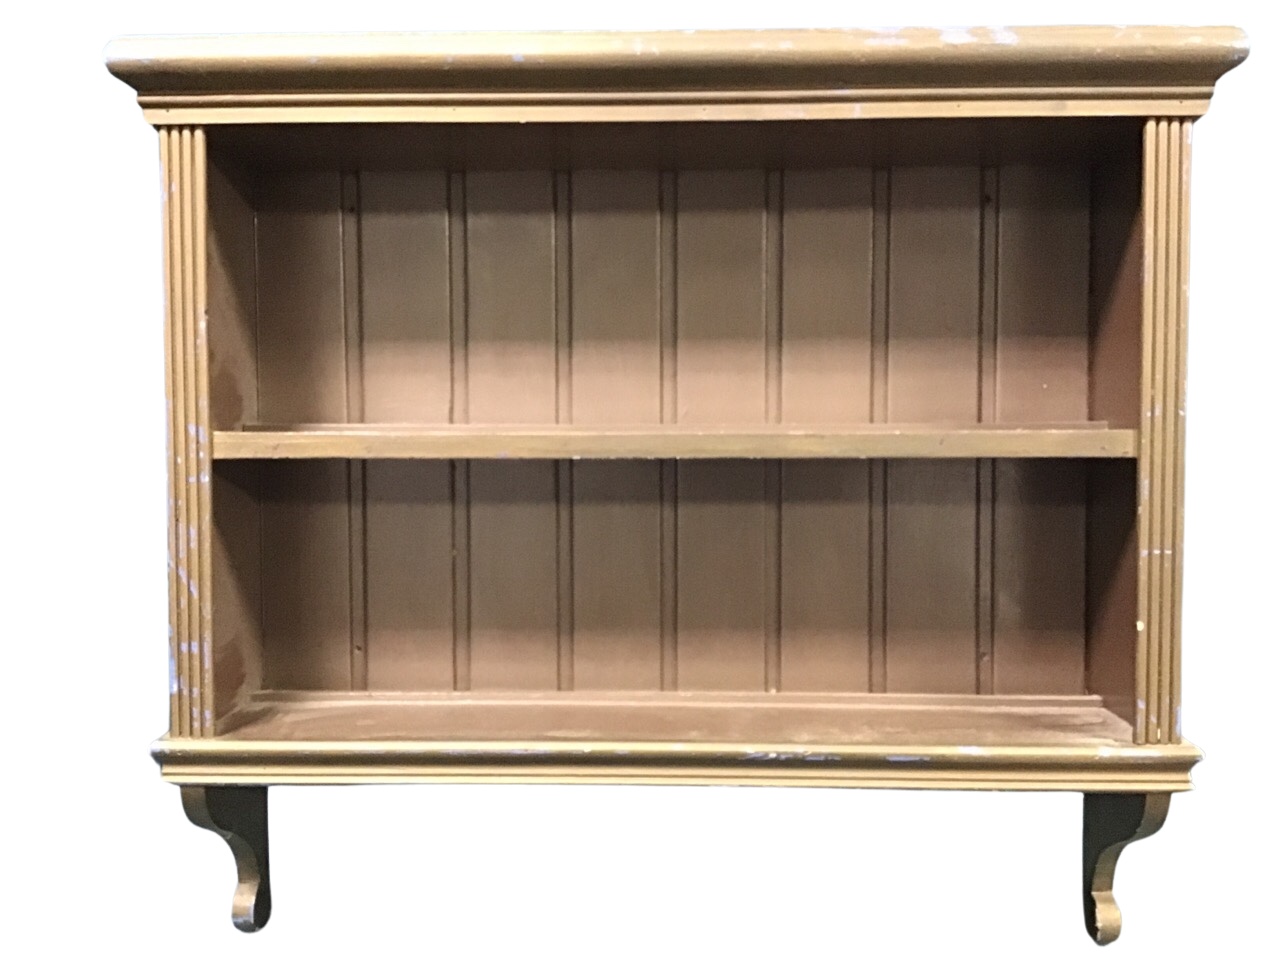 A painted wallhanging shelf unit with moulded cornice and tongue & grooved back with two shelves,